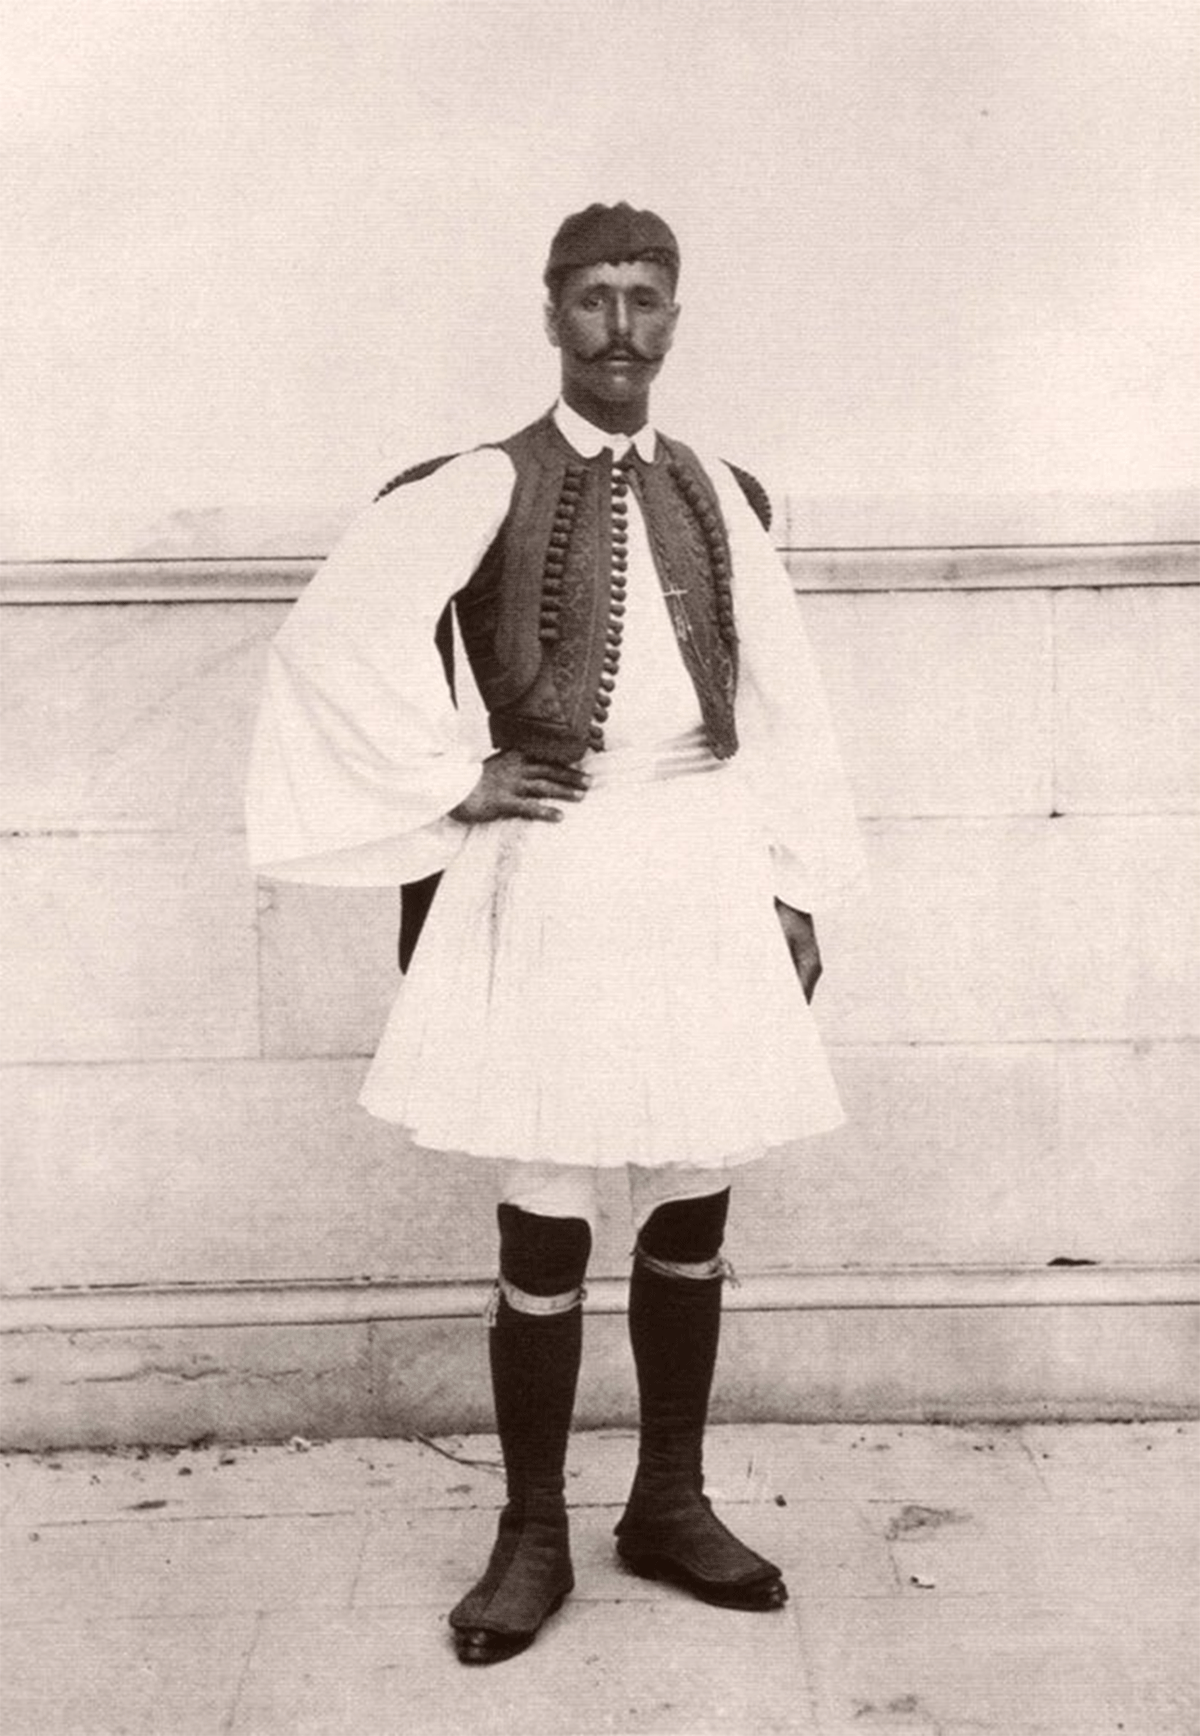 Greece's Spyridon Louis won the first-ever organised marathon at the first modern Olympic Games in 1896